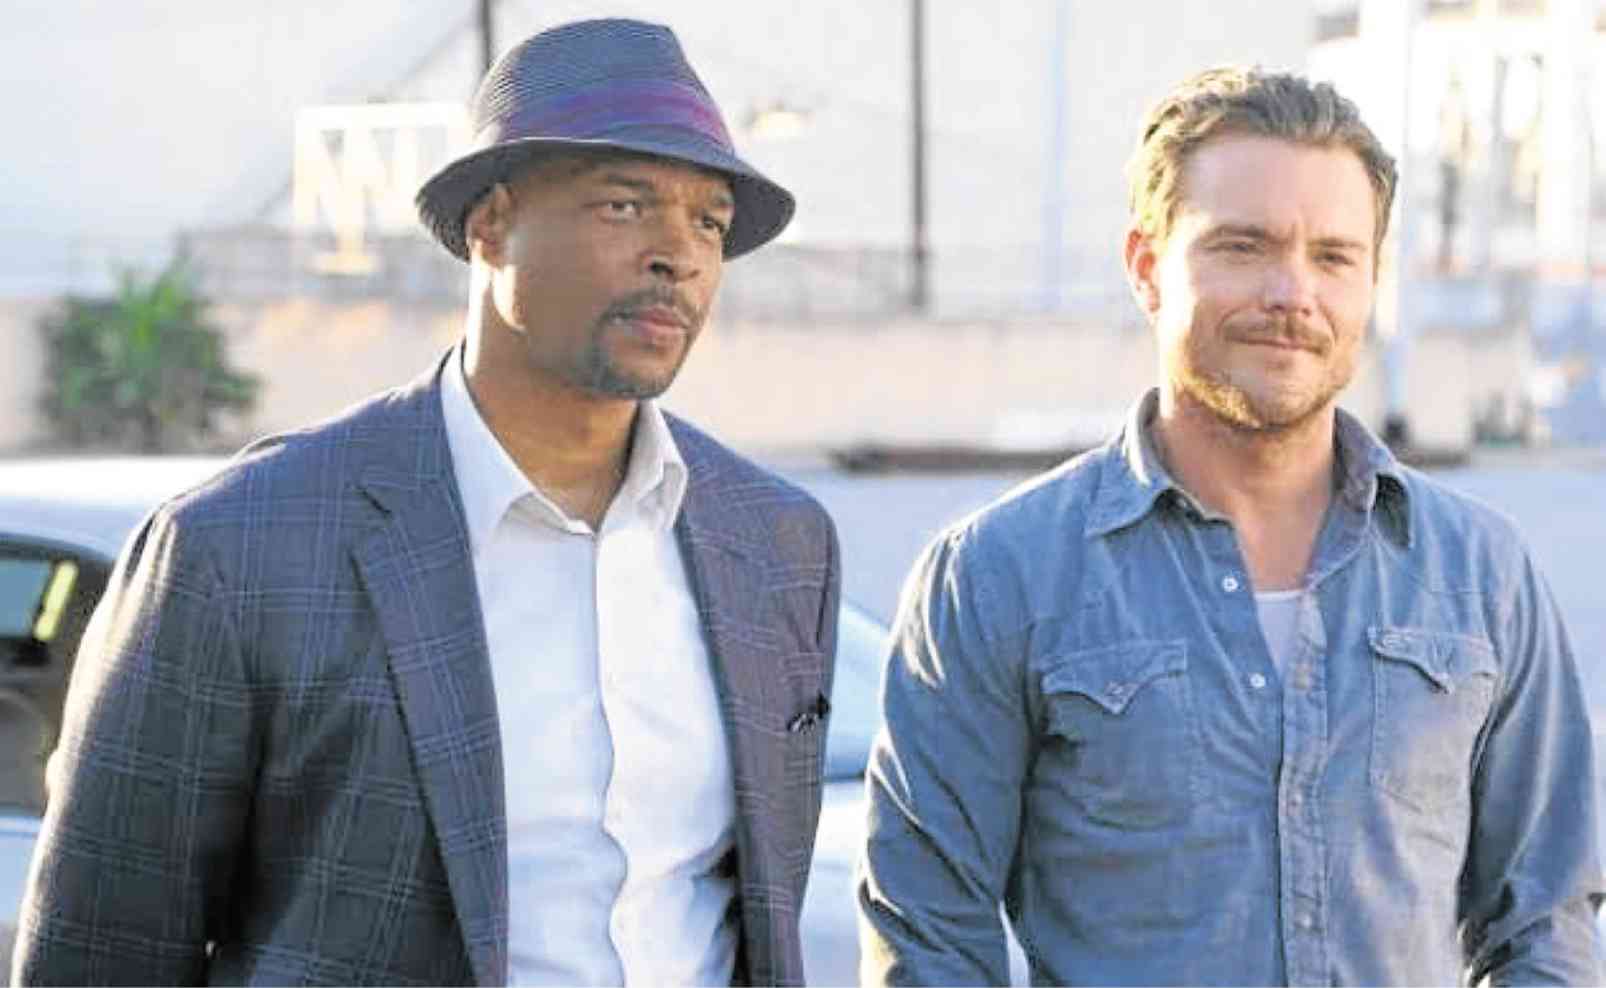 Damon Wayans (left) and Clayne Crawford of “Lethal Weapon”